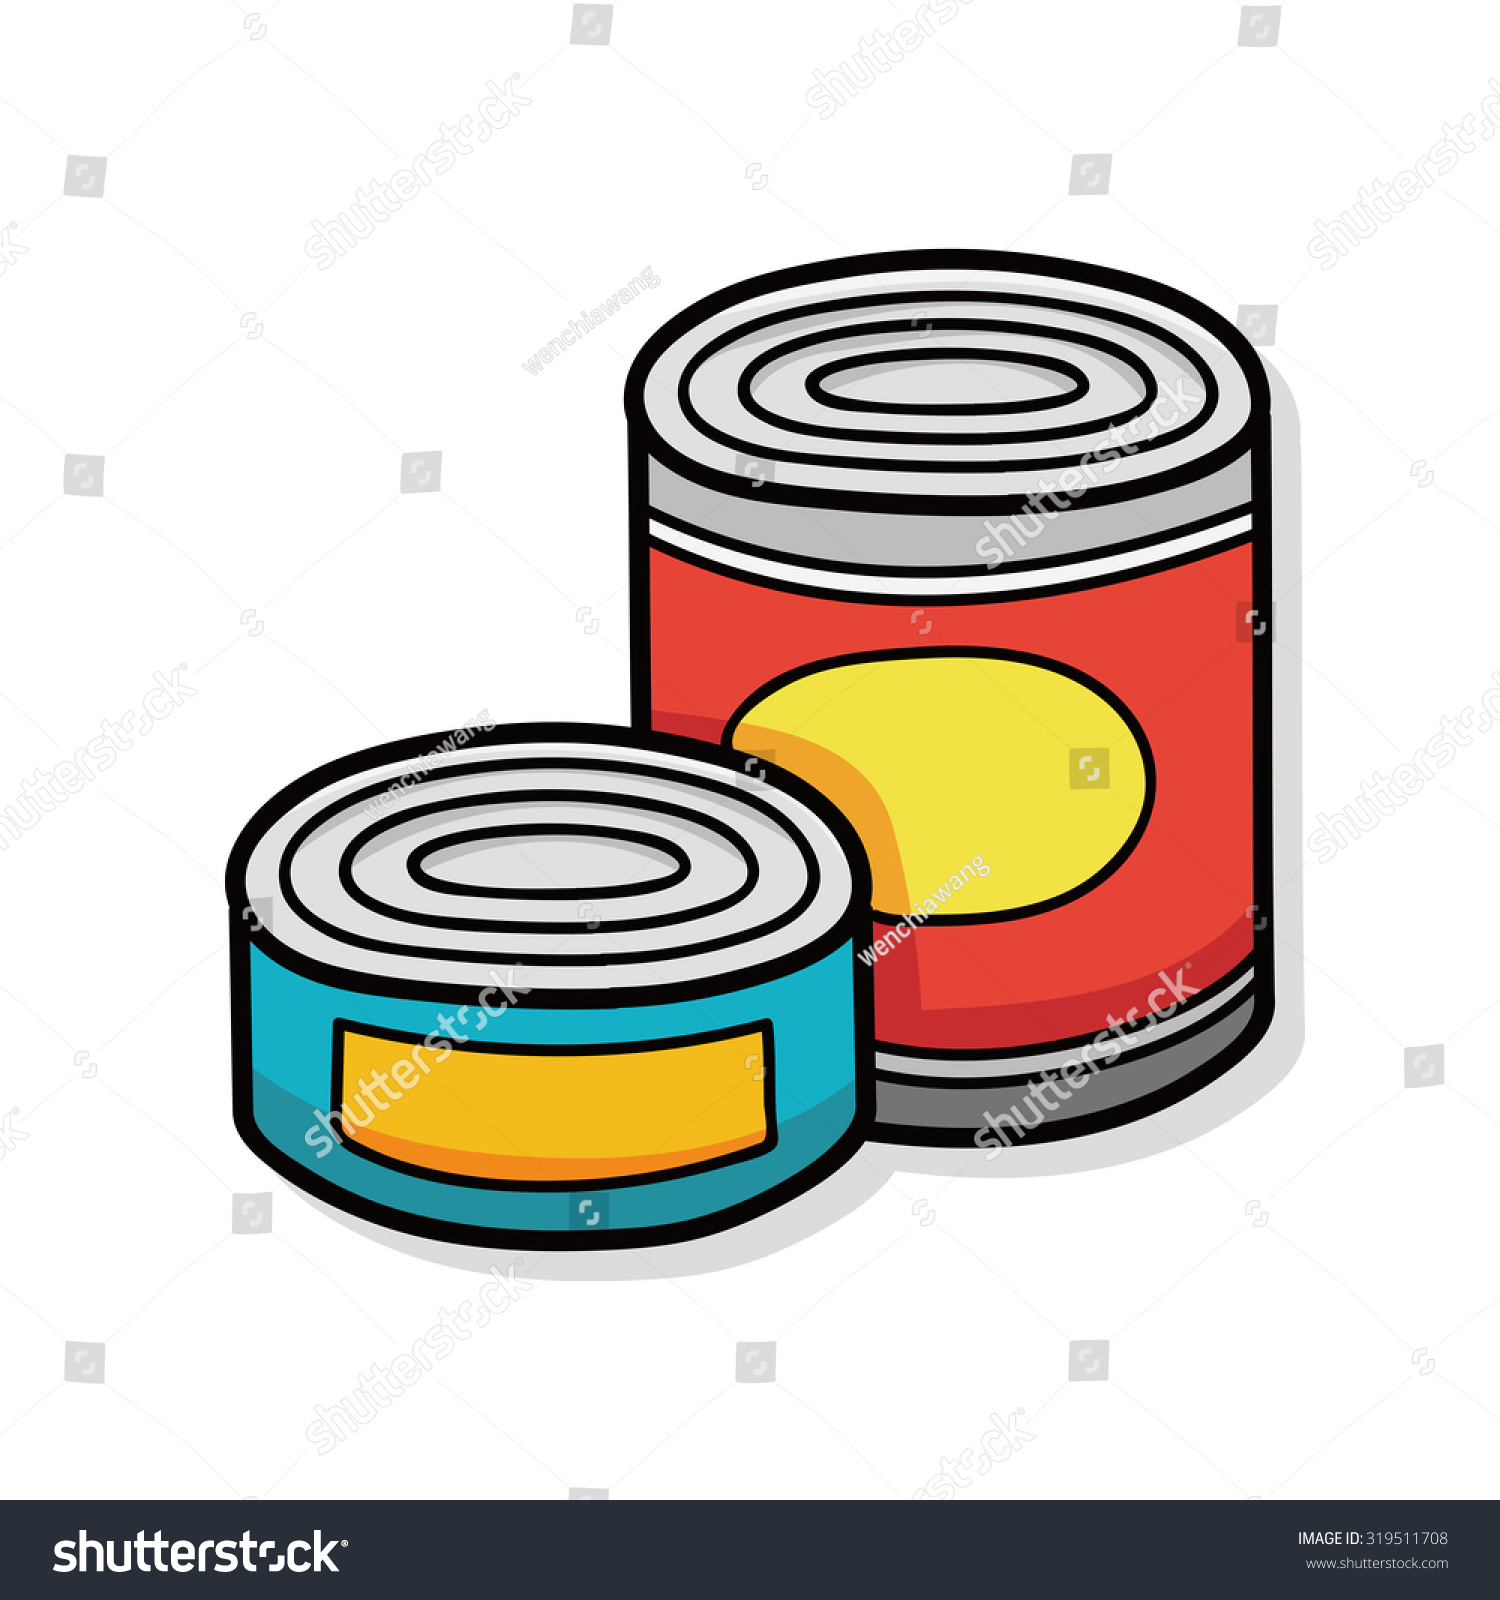 Canned Food Doodle Stock Vector Illustration 319511708 Shutterstock